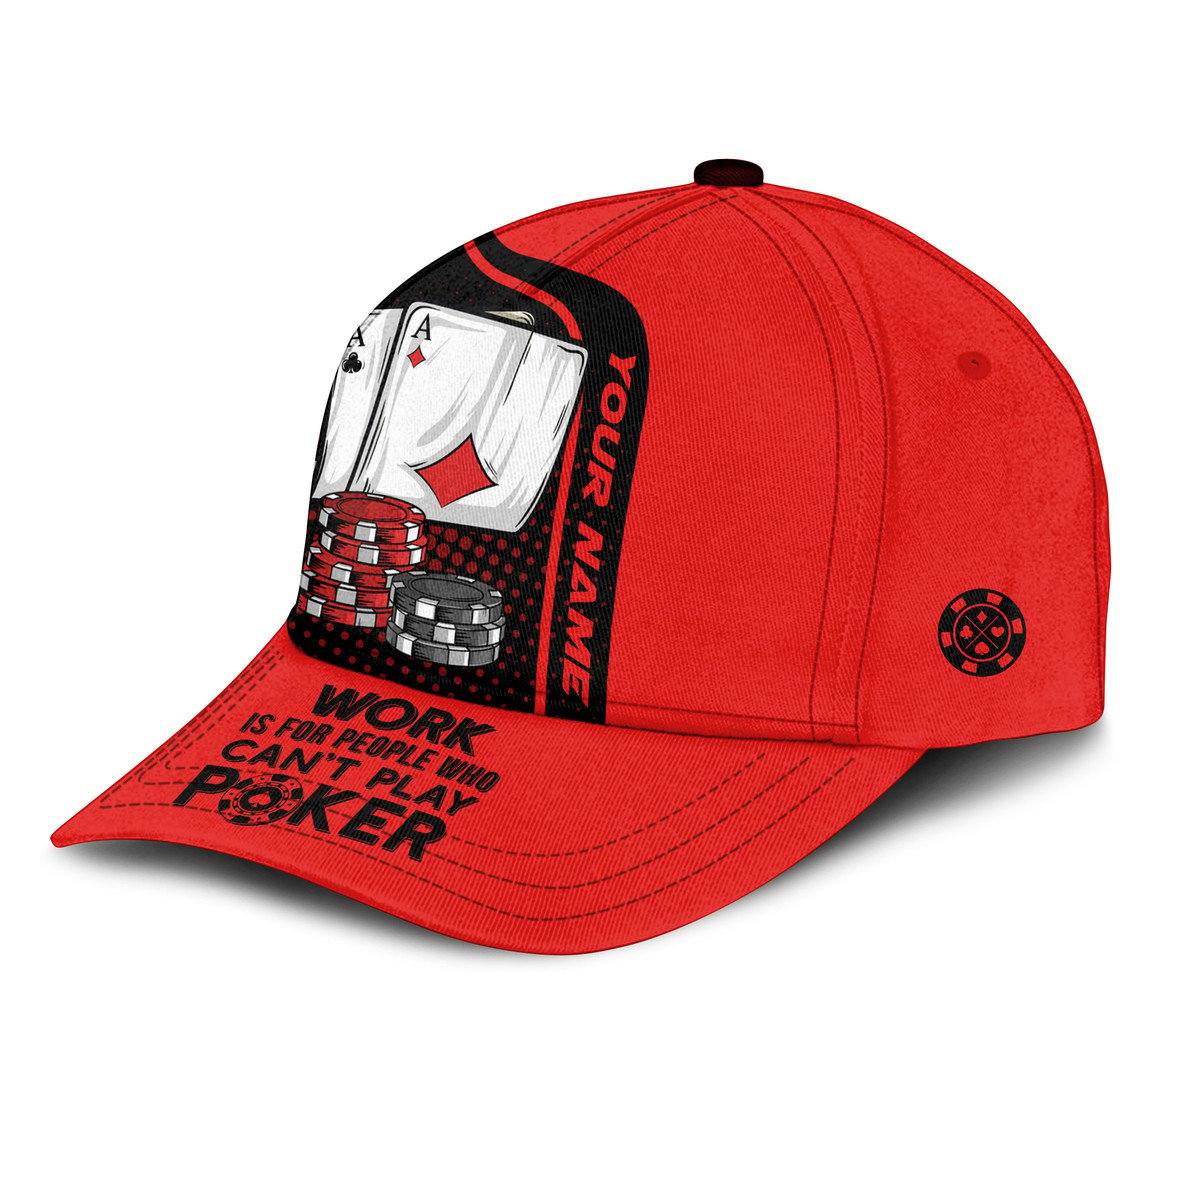 Personalized Name Poker Work and Folded Classic Cap/ Red Poker Cap for Men Women